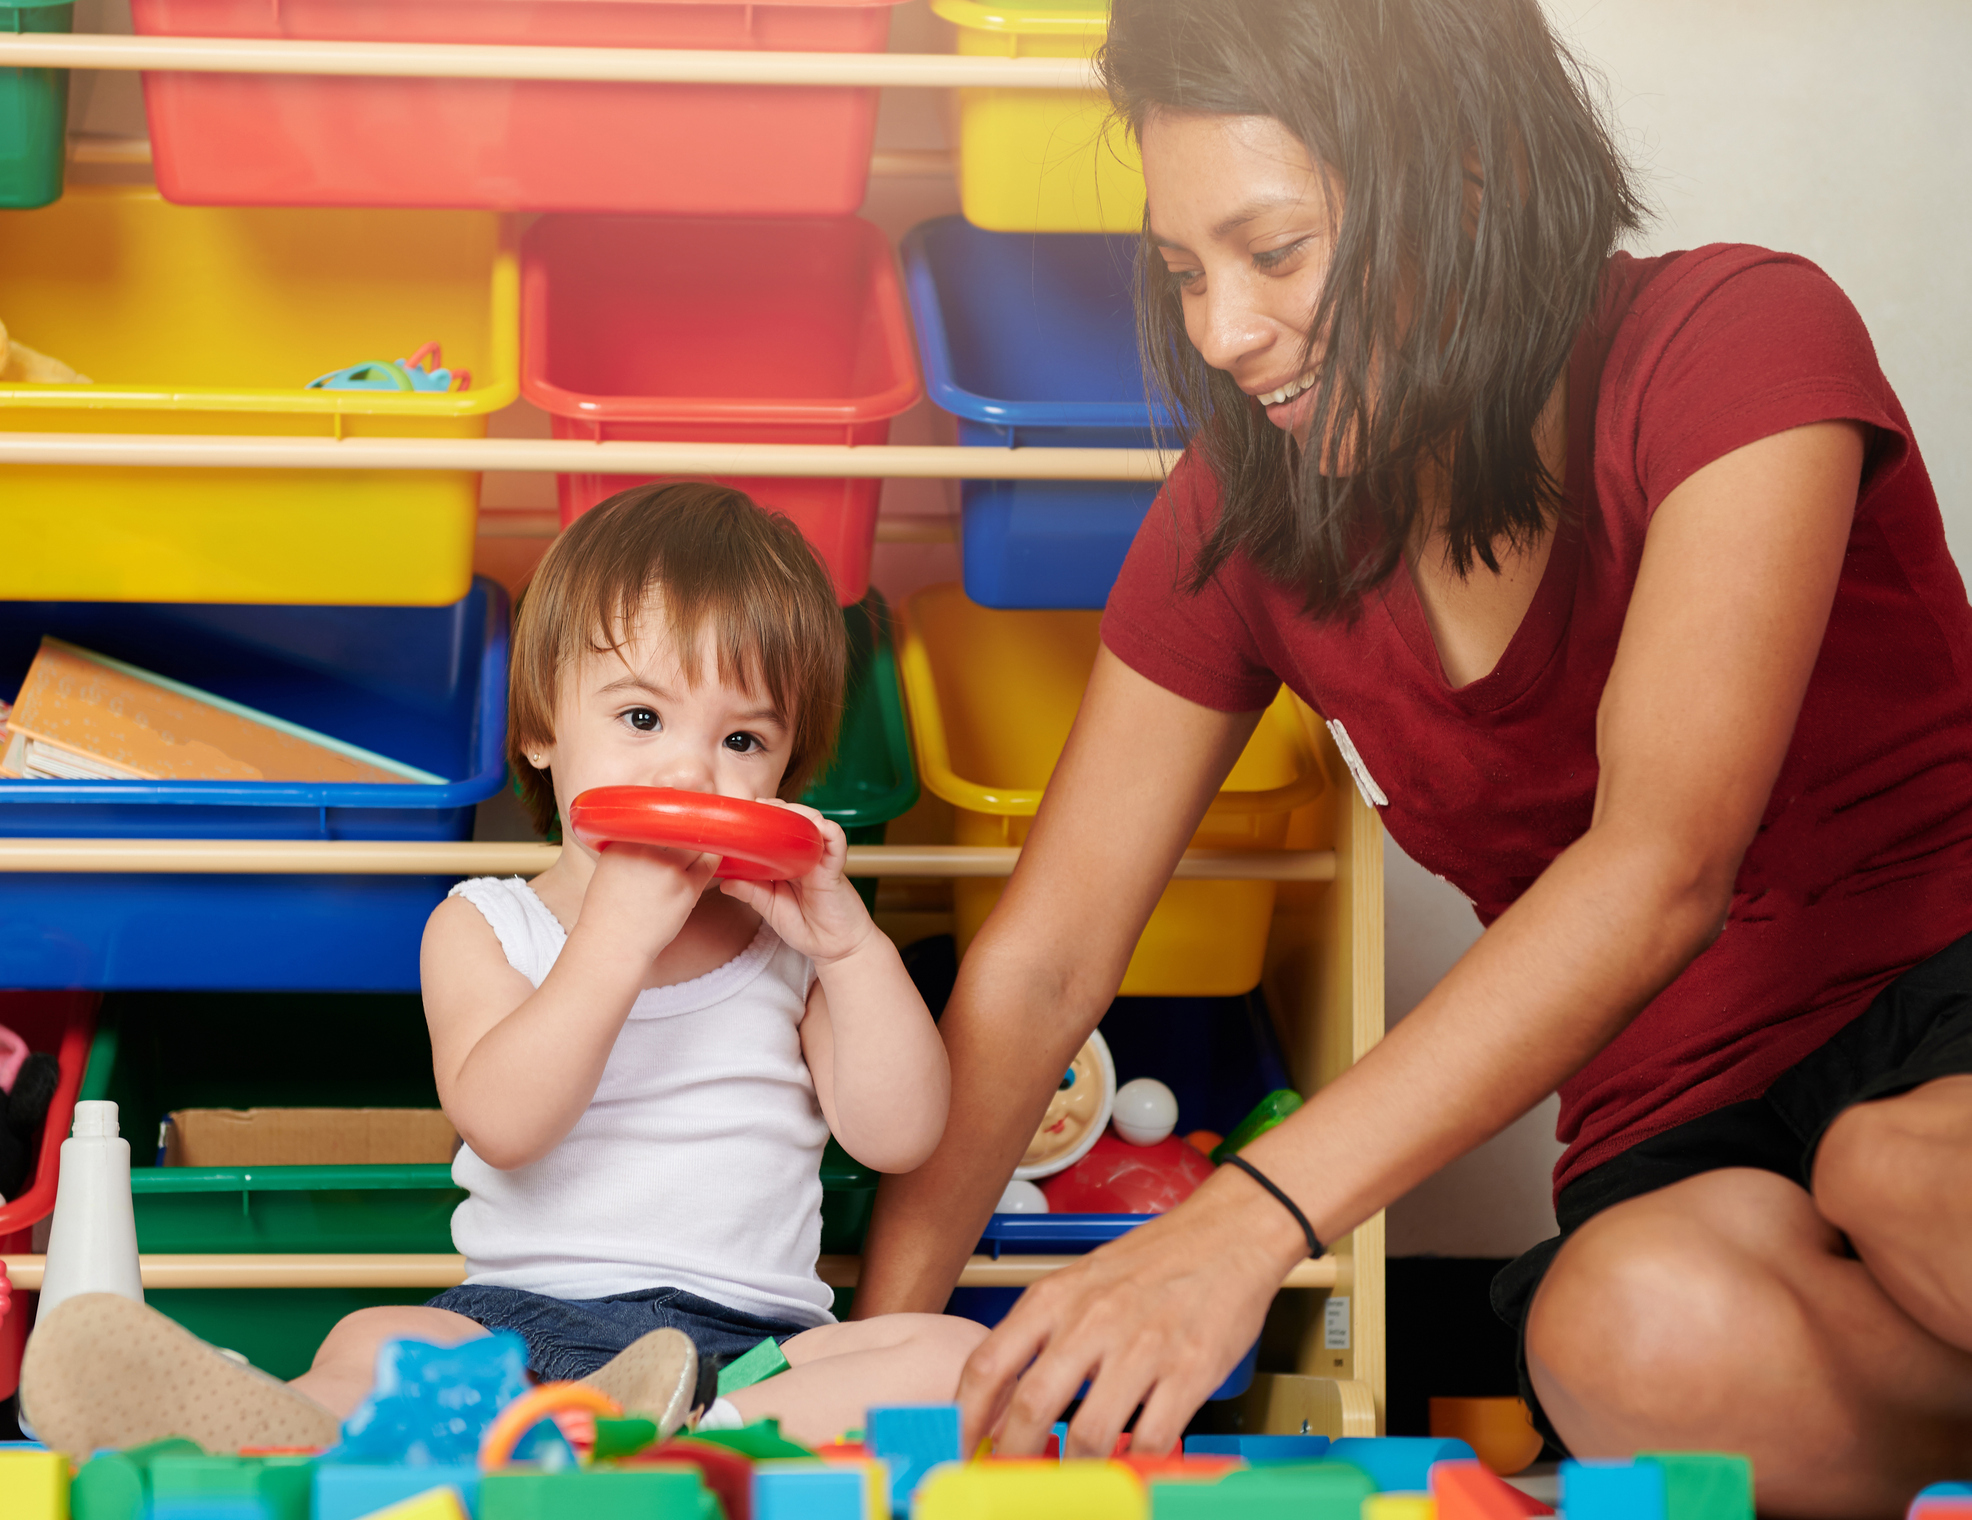 Female child care professional playing with young child and colorful toys.